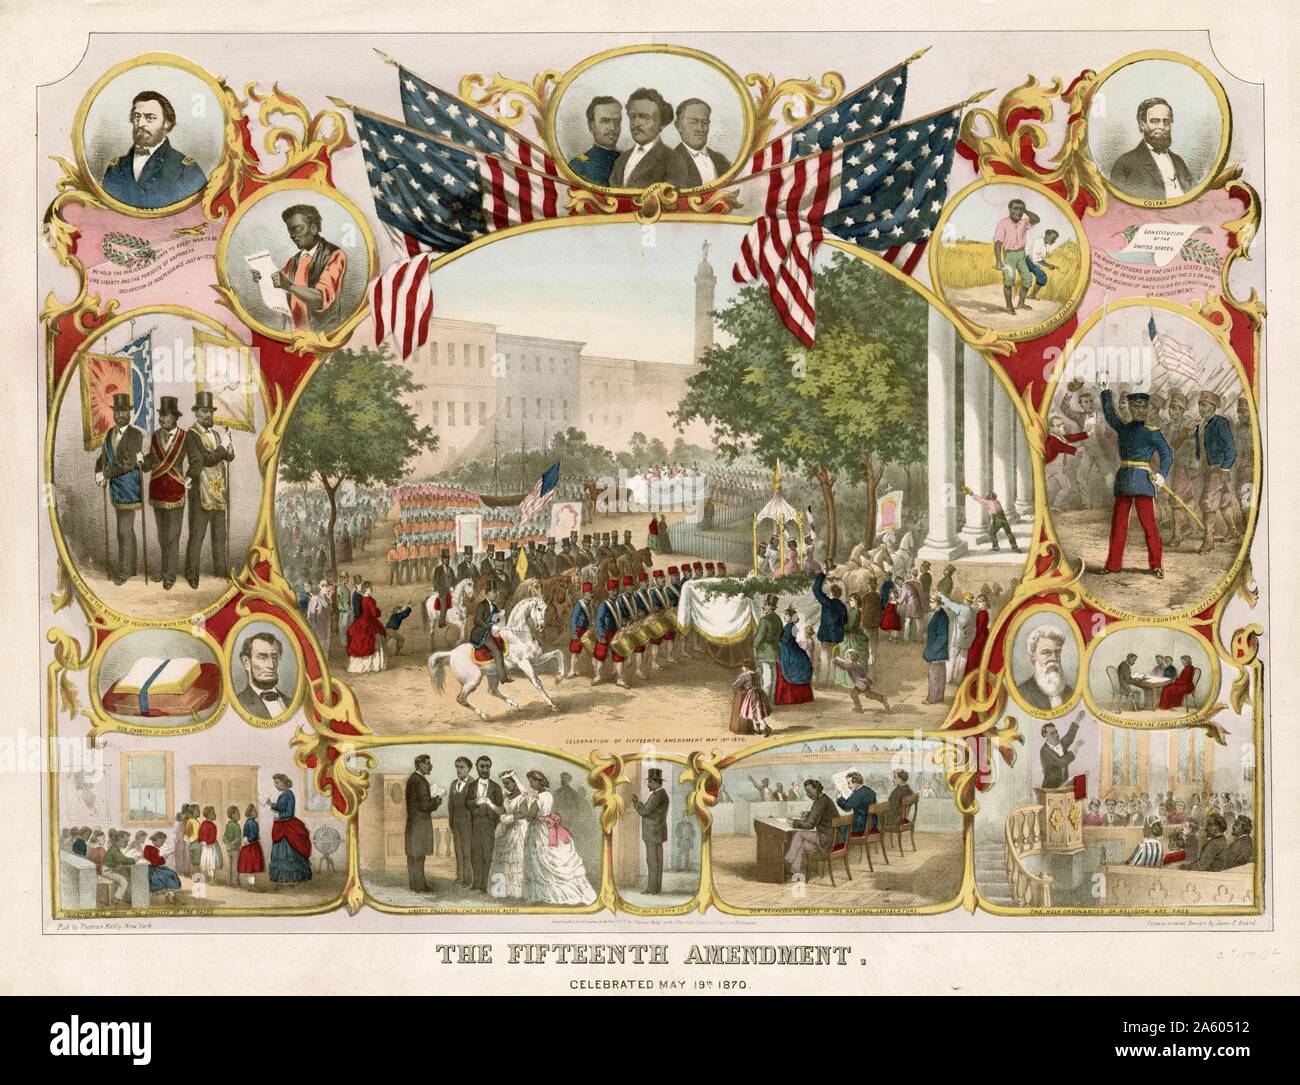 The Fifteenth Amendment (Amendment XV) to the United States Constitution prohibits the federal and state governments from denying a citizen the right to vote based on that citizen's 'race; colour; or previous condition of servitude'. It was ratified on February 3; 1870; Stock Photo